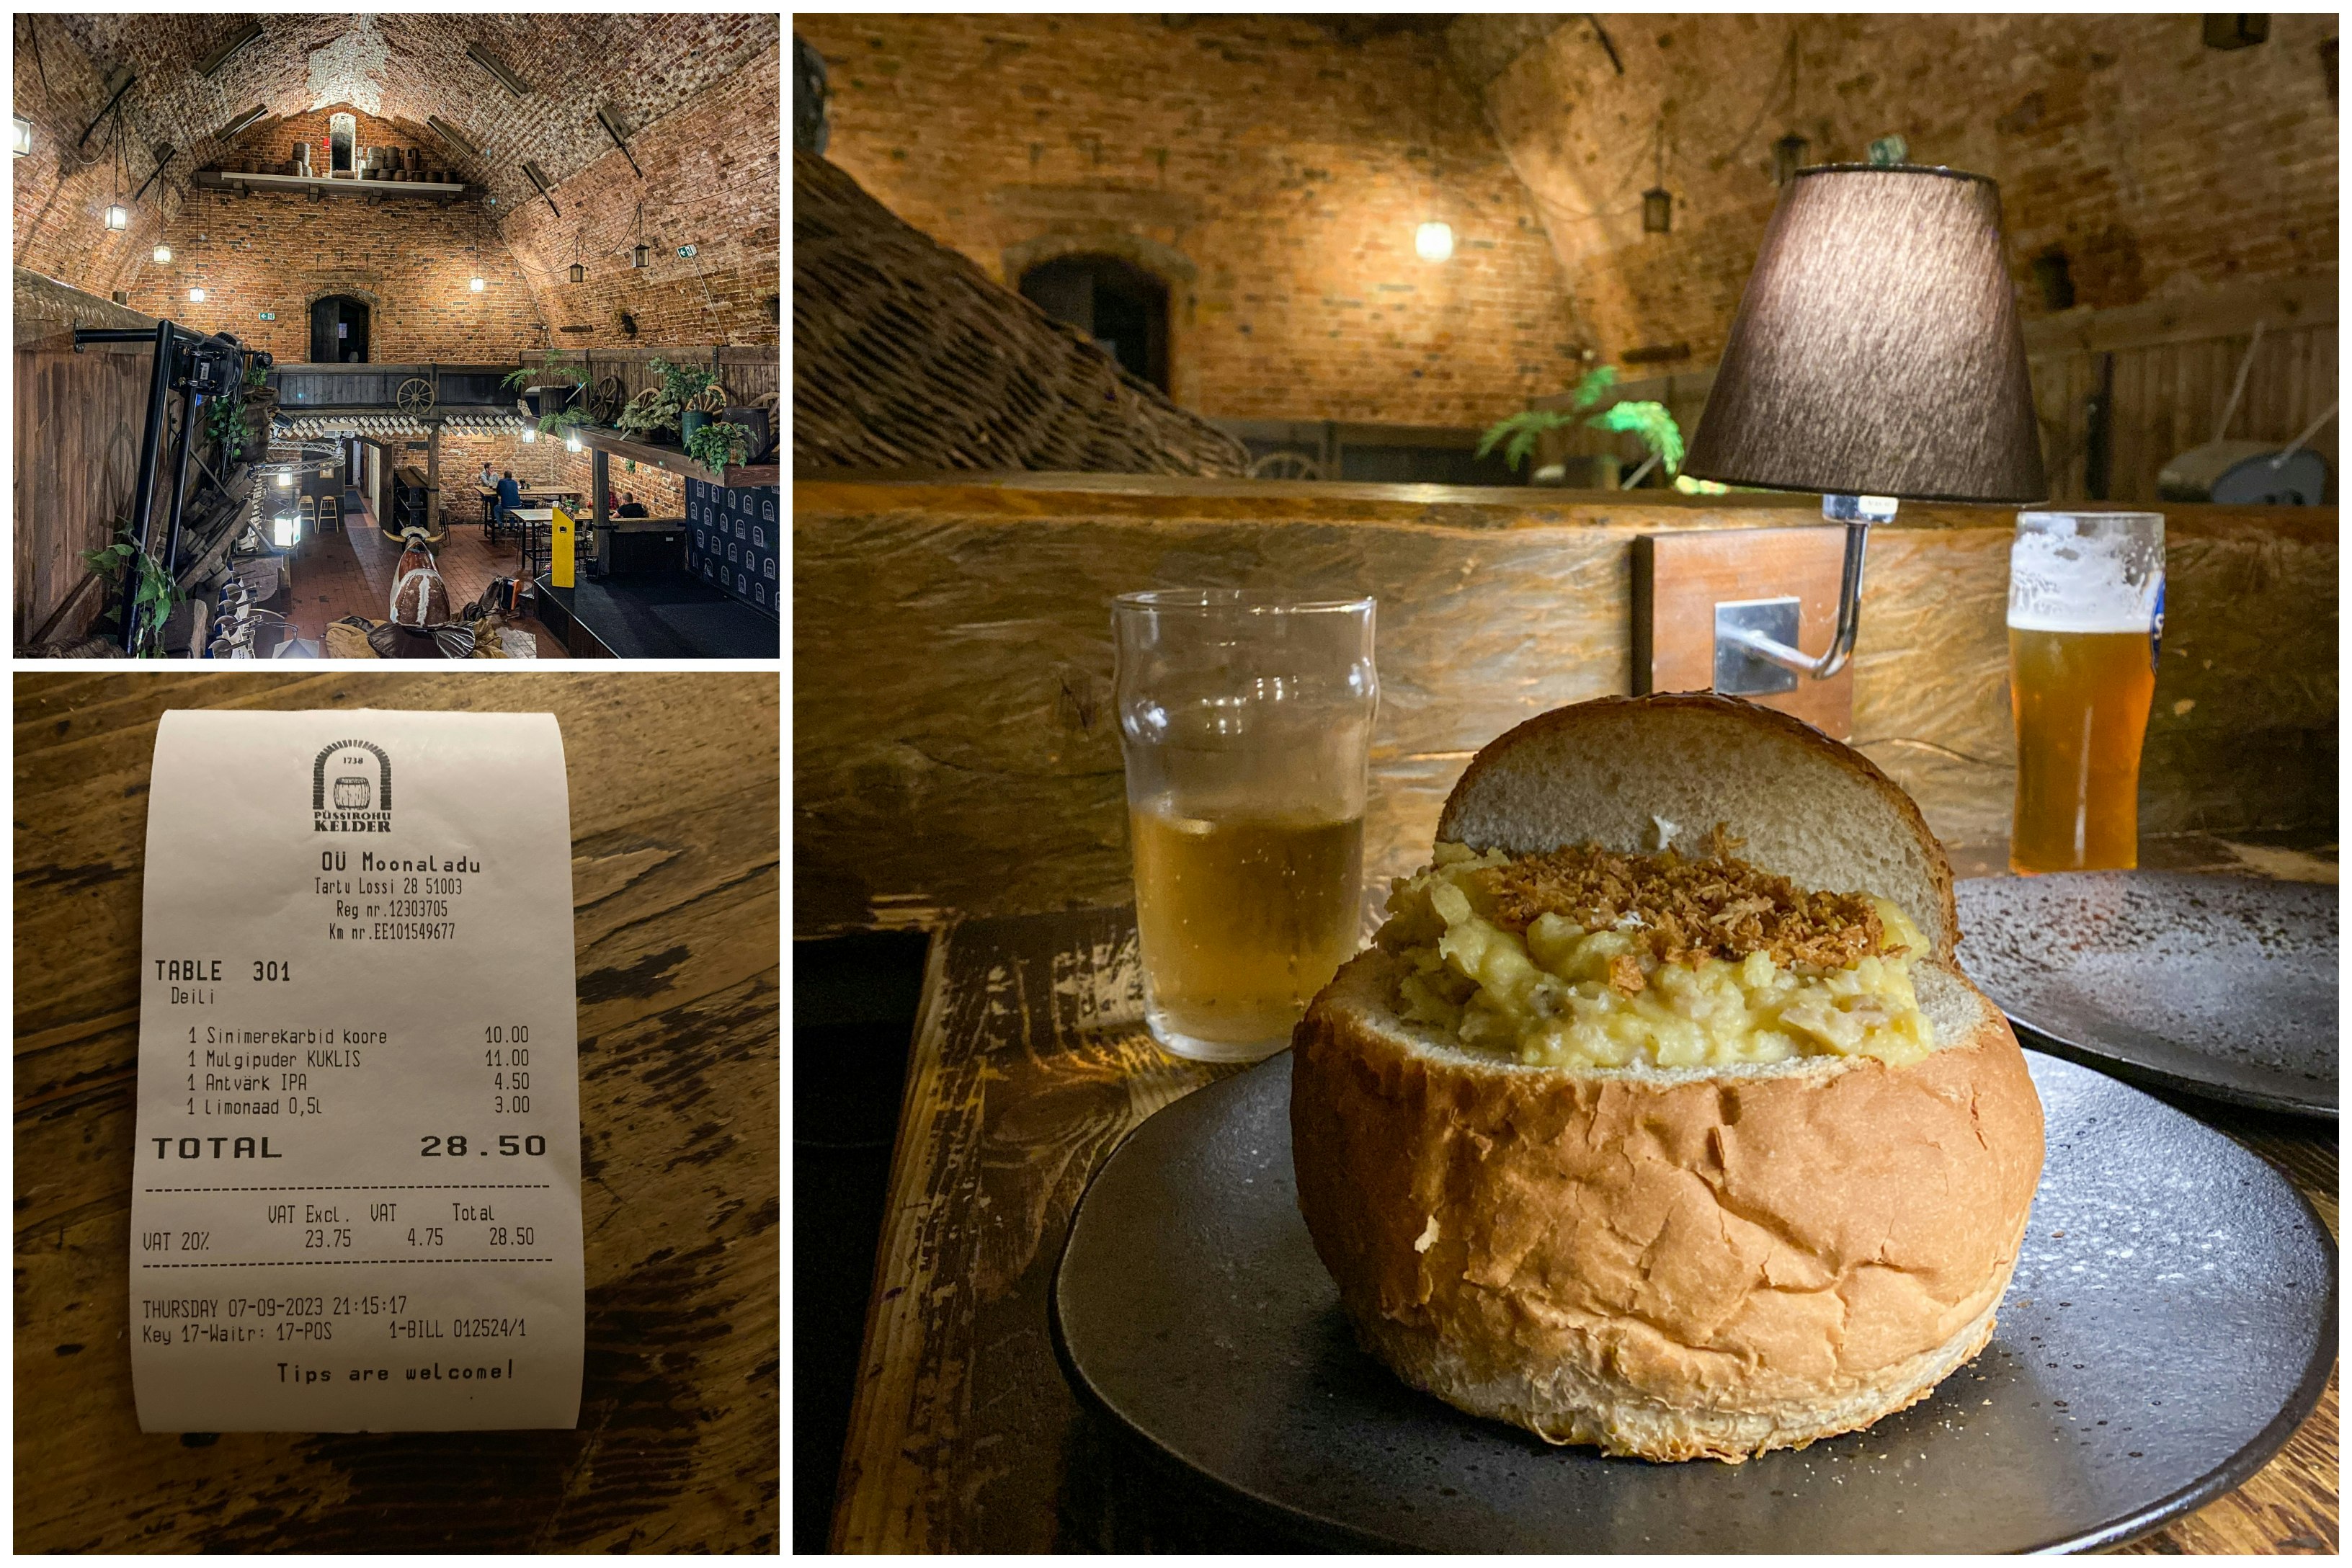 Collage of images from the Gunpowder Cellar of Tartu, including a Mulgipuder, a traditional southern Estonian dish of potatoes, pearl barley and bacon